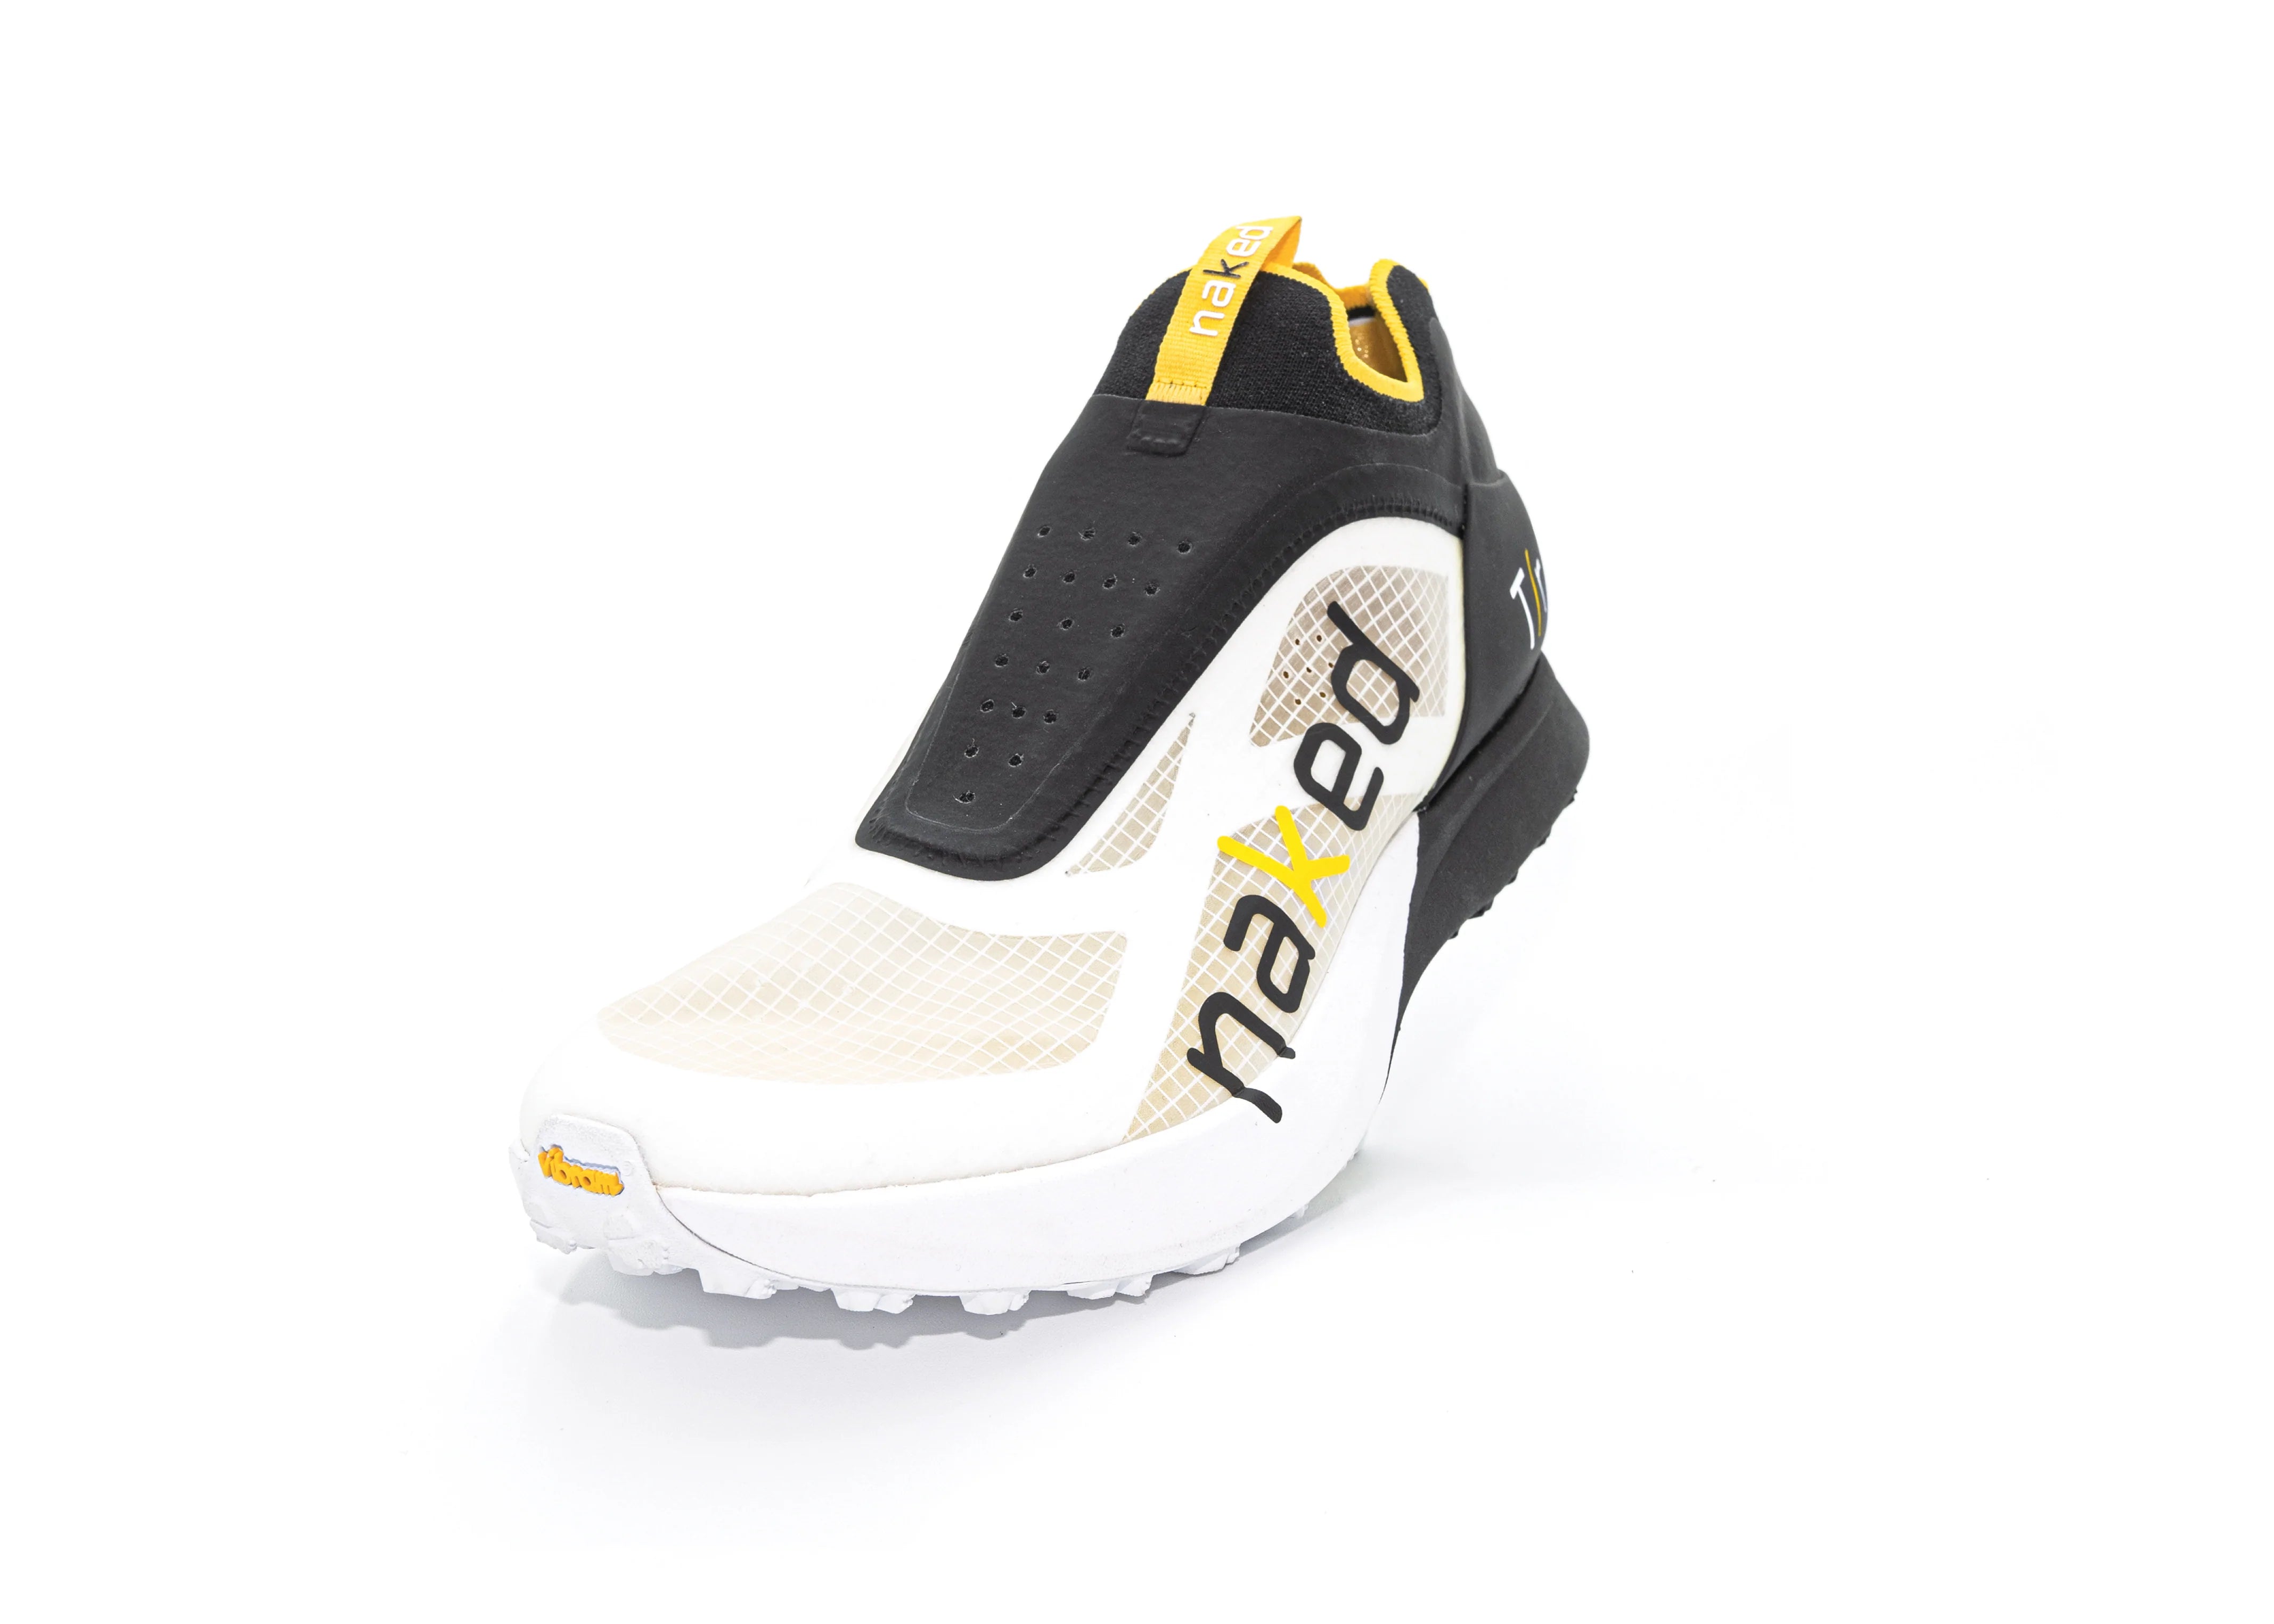 NAKED T/r Trail Racing Shoe - Unisex